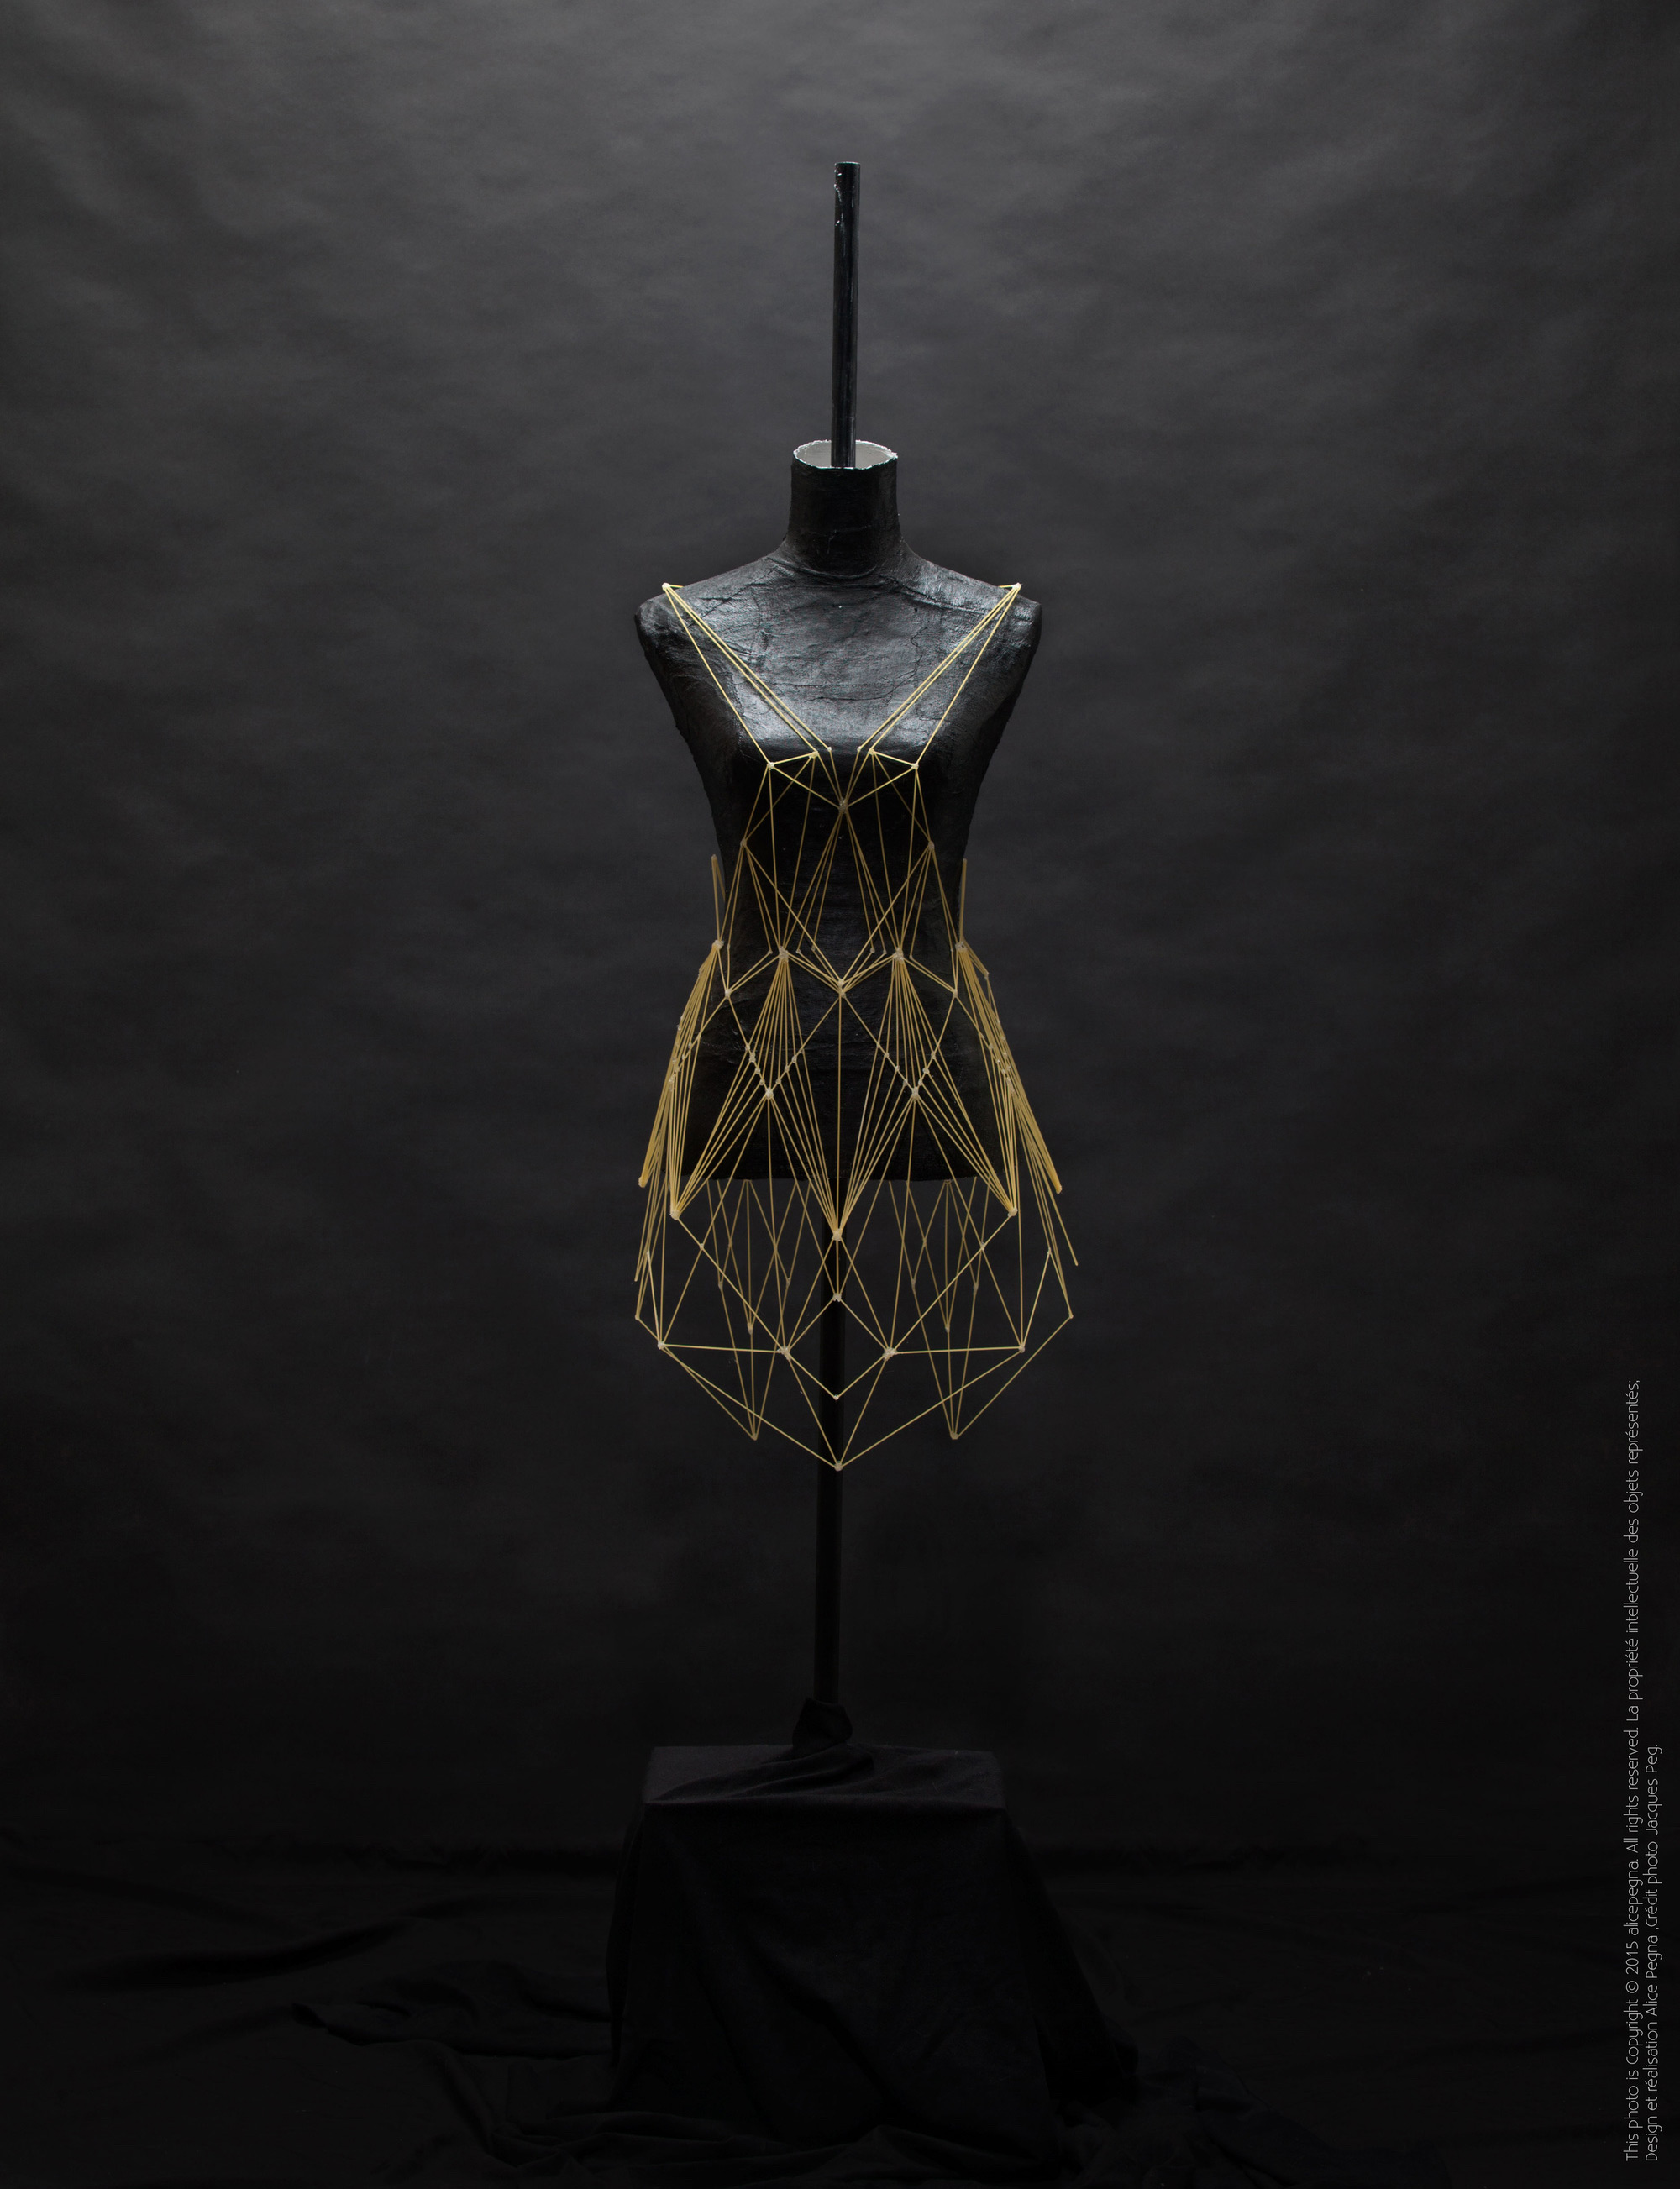 Geometric Dresses and Headpieces Created Entirely From Strands of Spaghetti